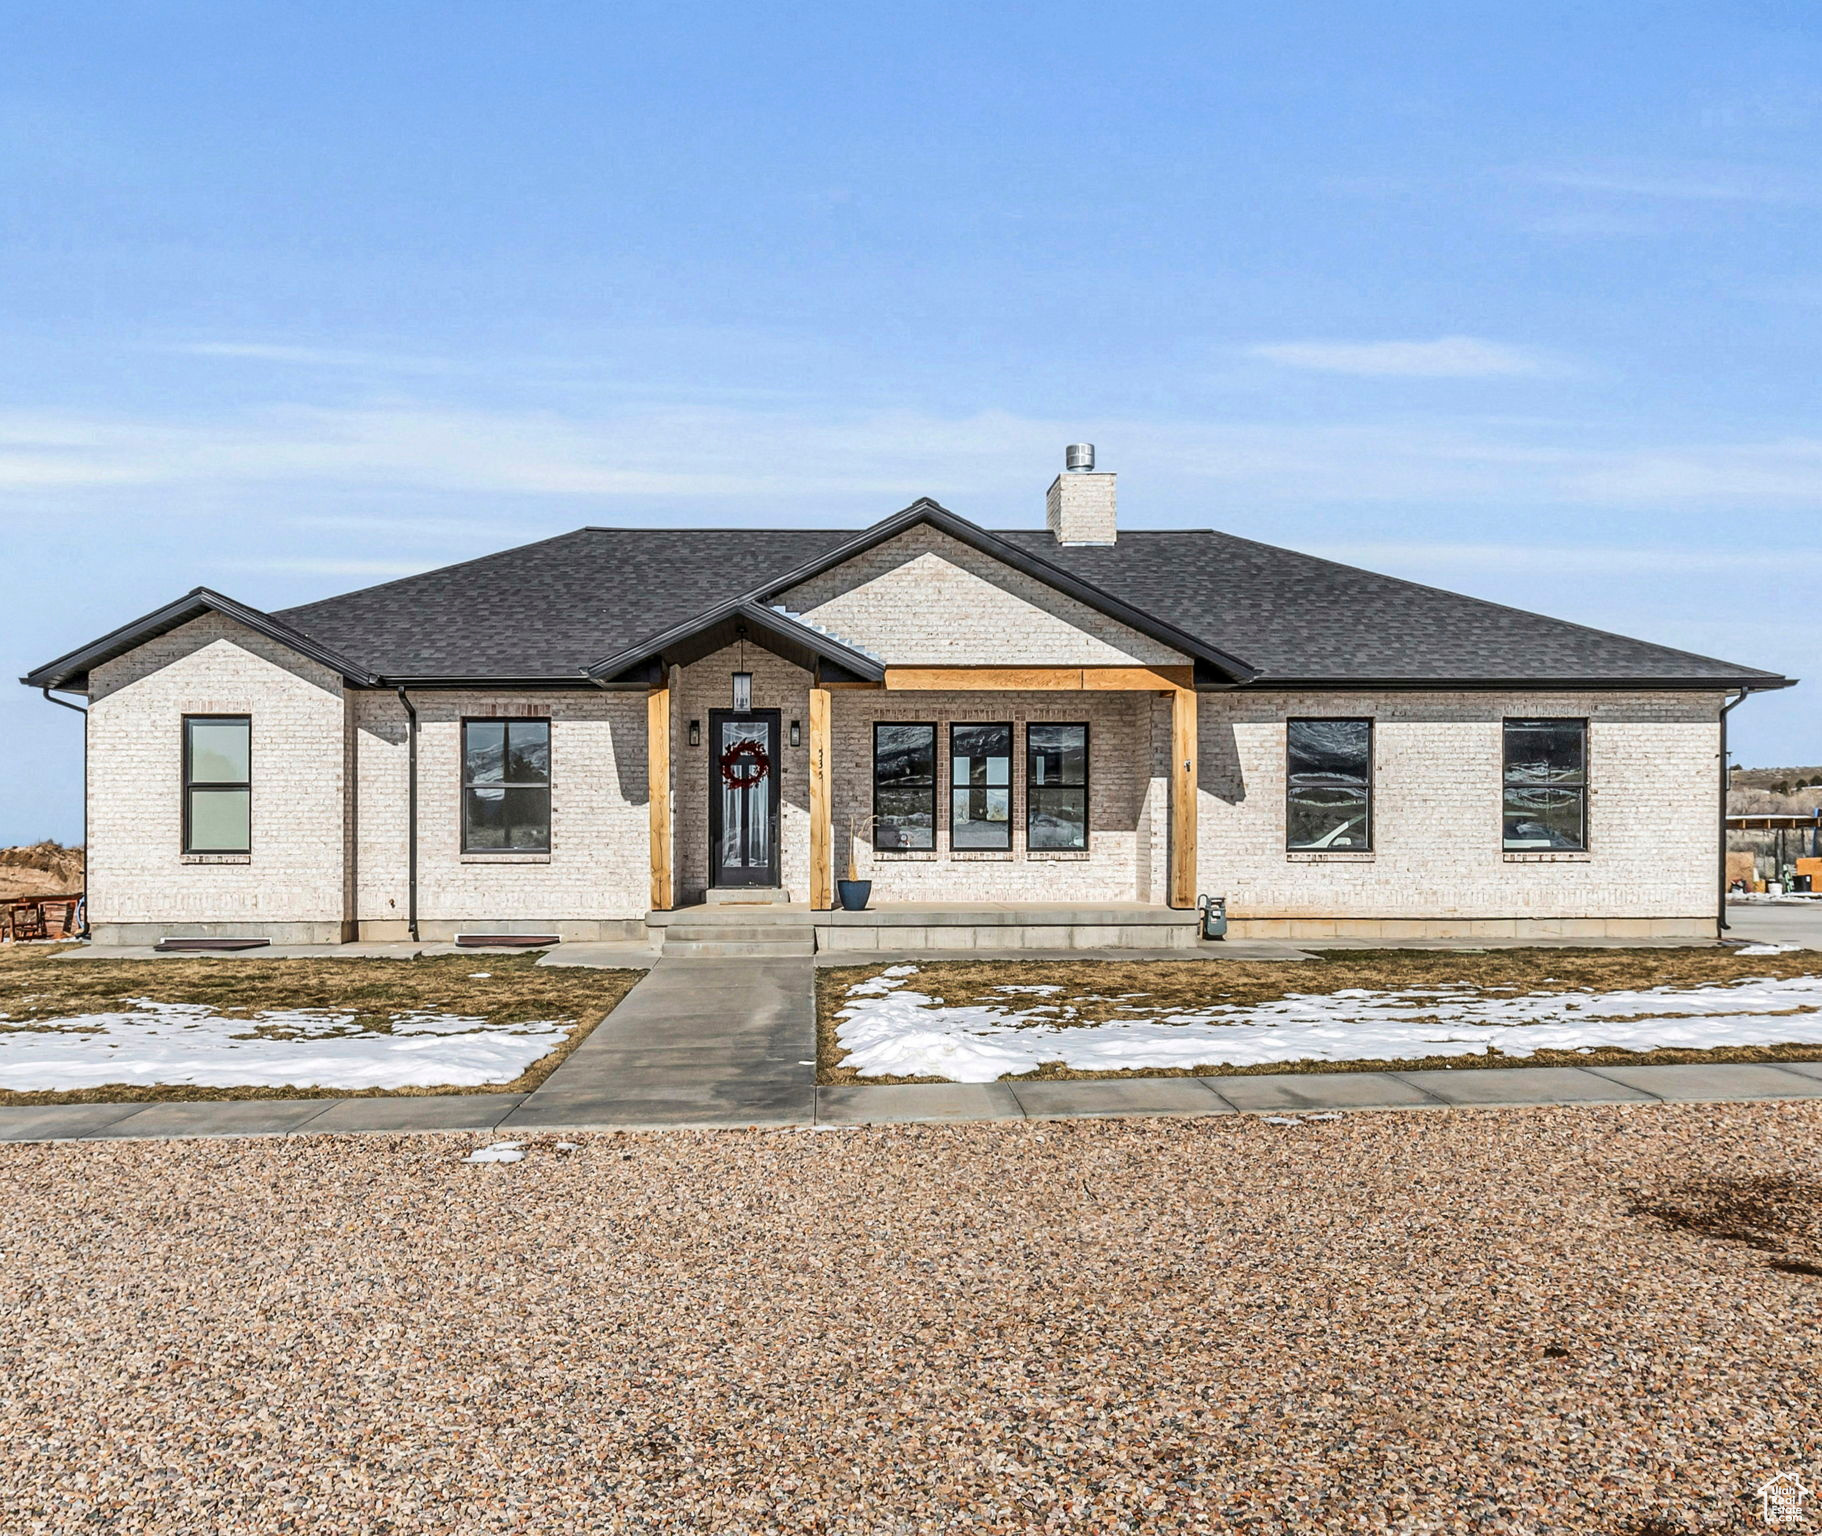 535 E 500 S, Fillmore, Utah 84631, 4 Bedrooms Bedrooms, 14 Rooms Rooms,3 BathroomsBathrooms,Residential,For sale,500,1981058